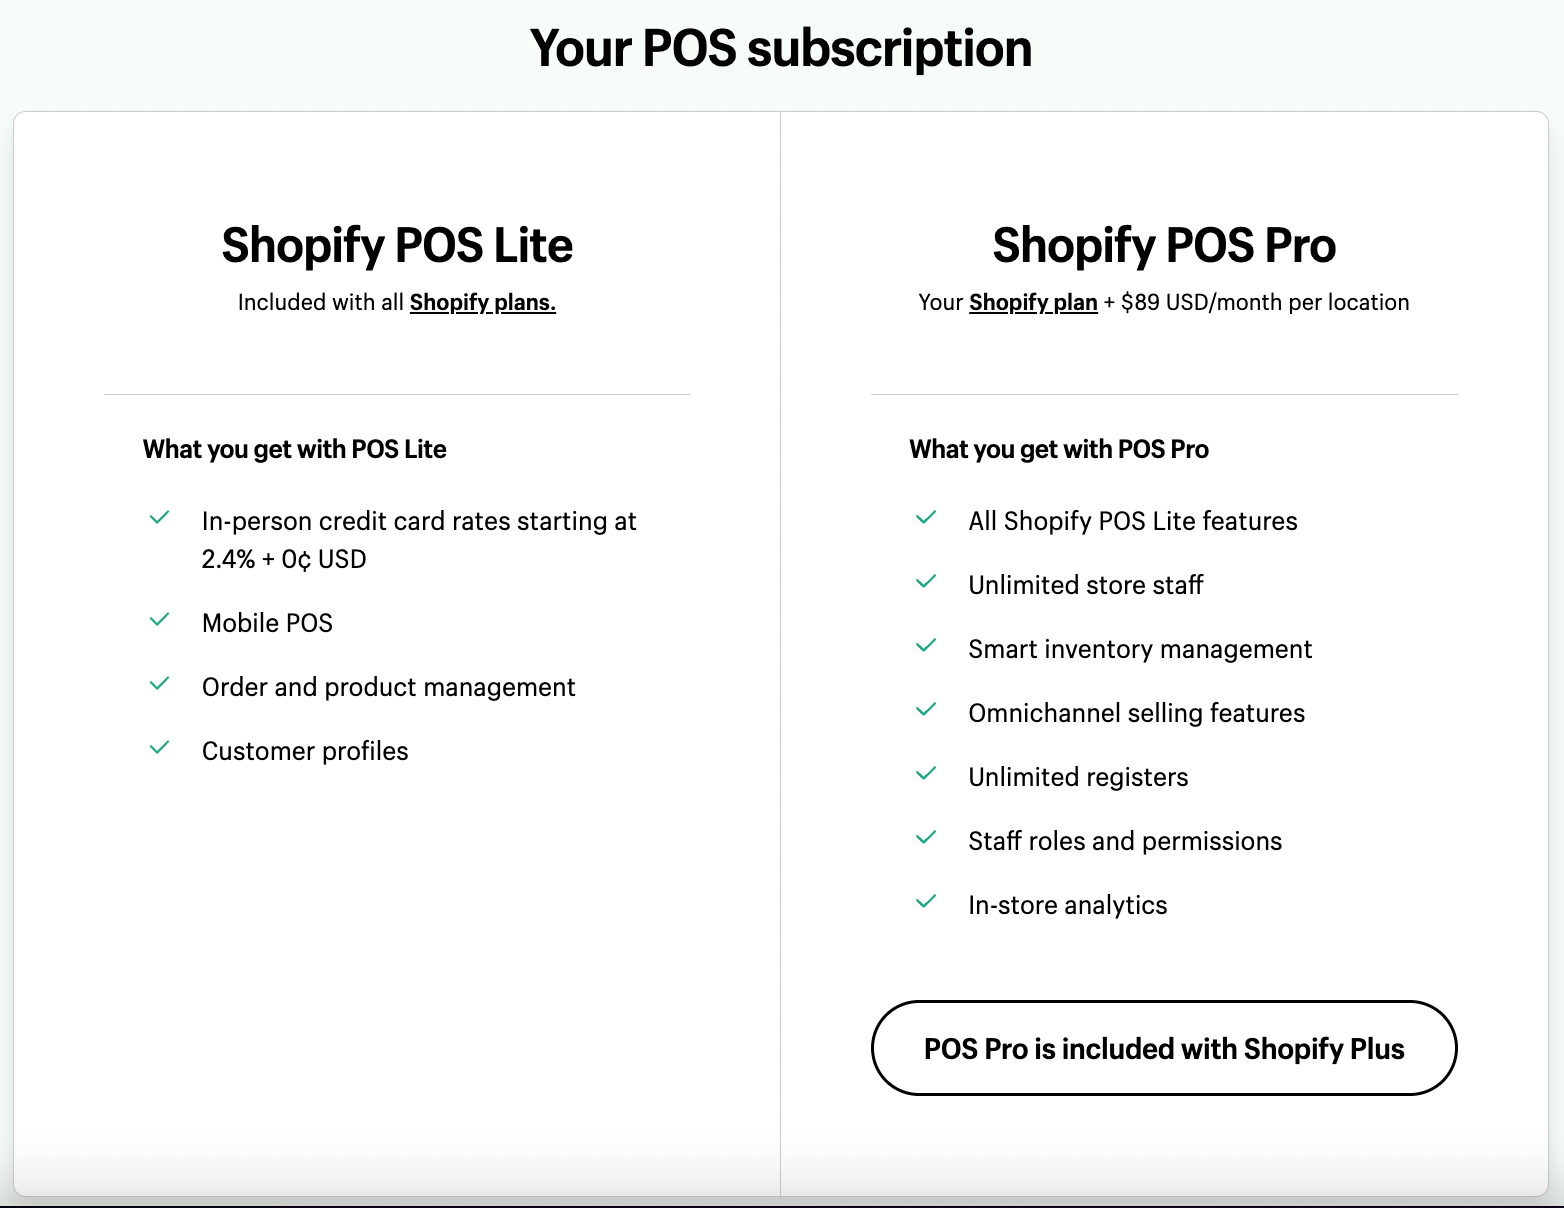 A screenshot showing options for Shopify POS Lite or Shopify POS Pro. Shopify Lite is included with all Shopify plans, while Shopify POS Pro is $89 per month, per location, in addition to a paid Shopify plan.